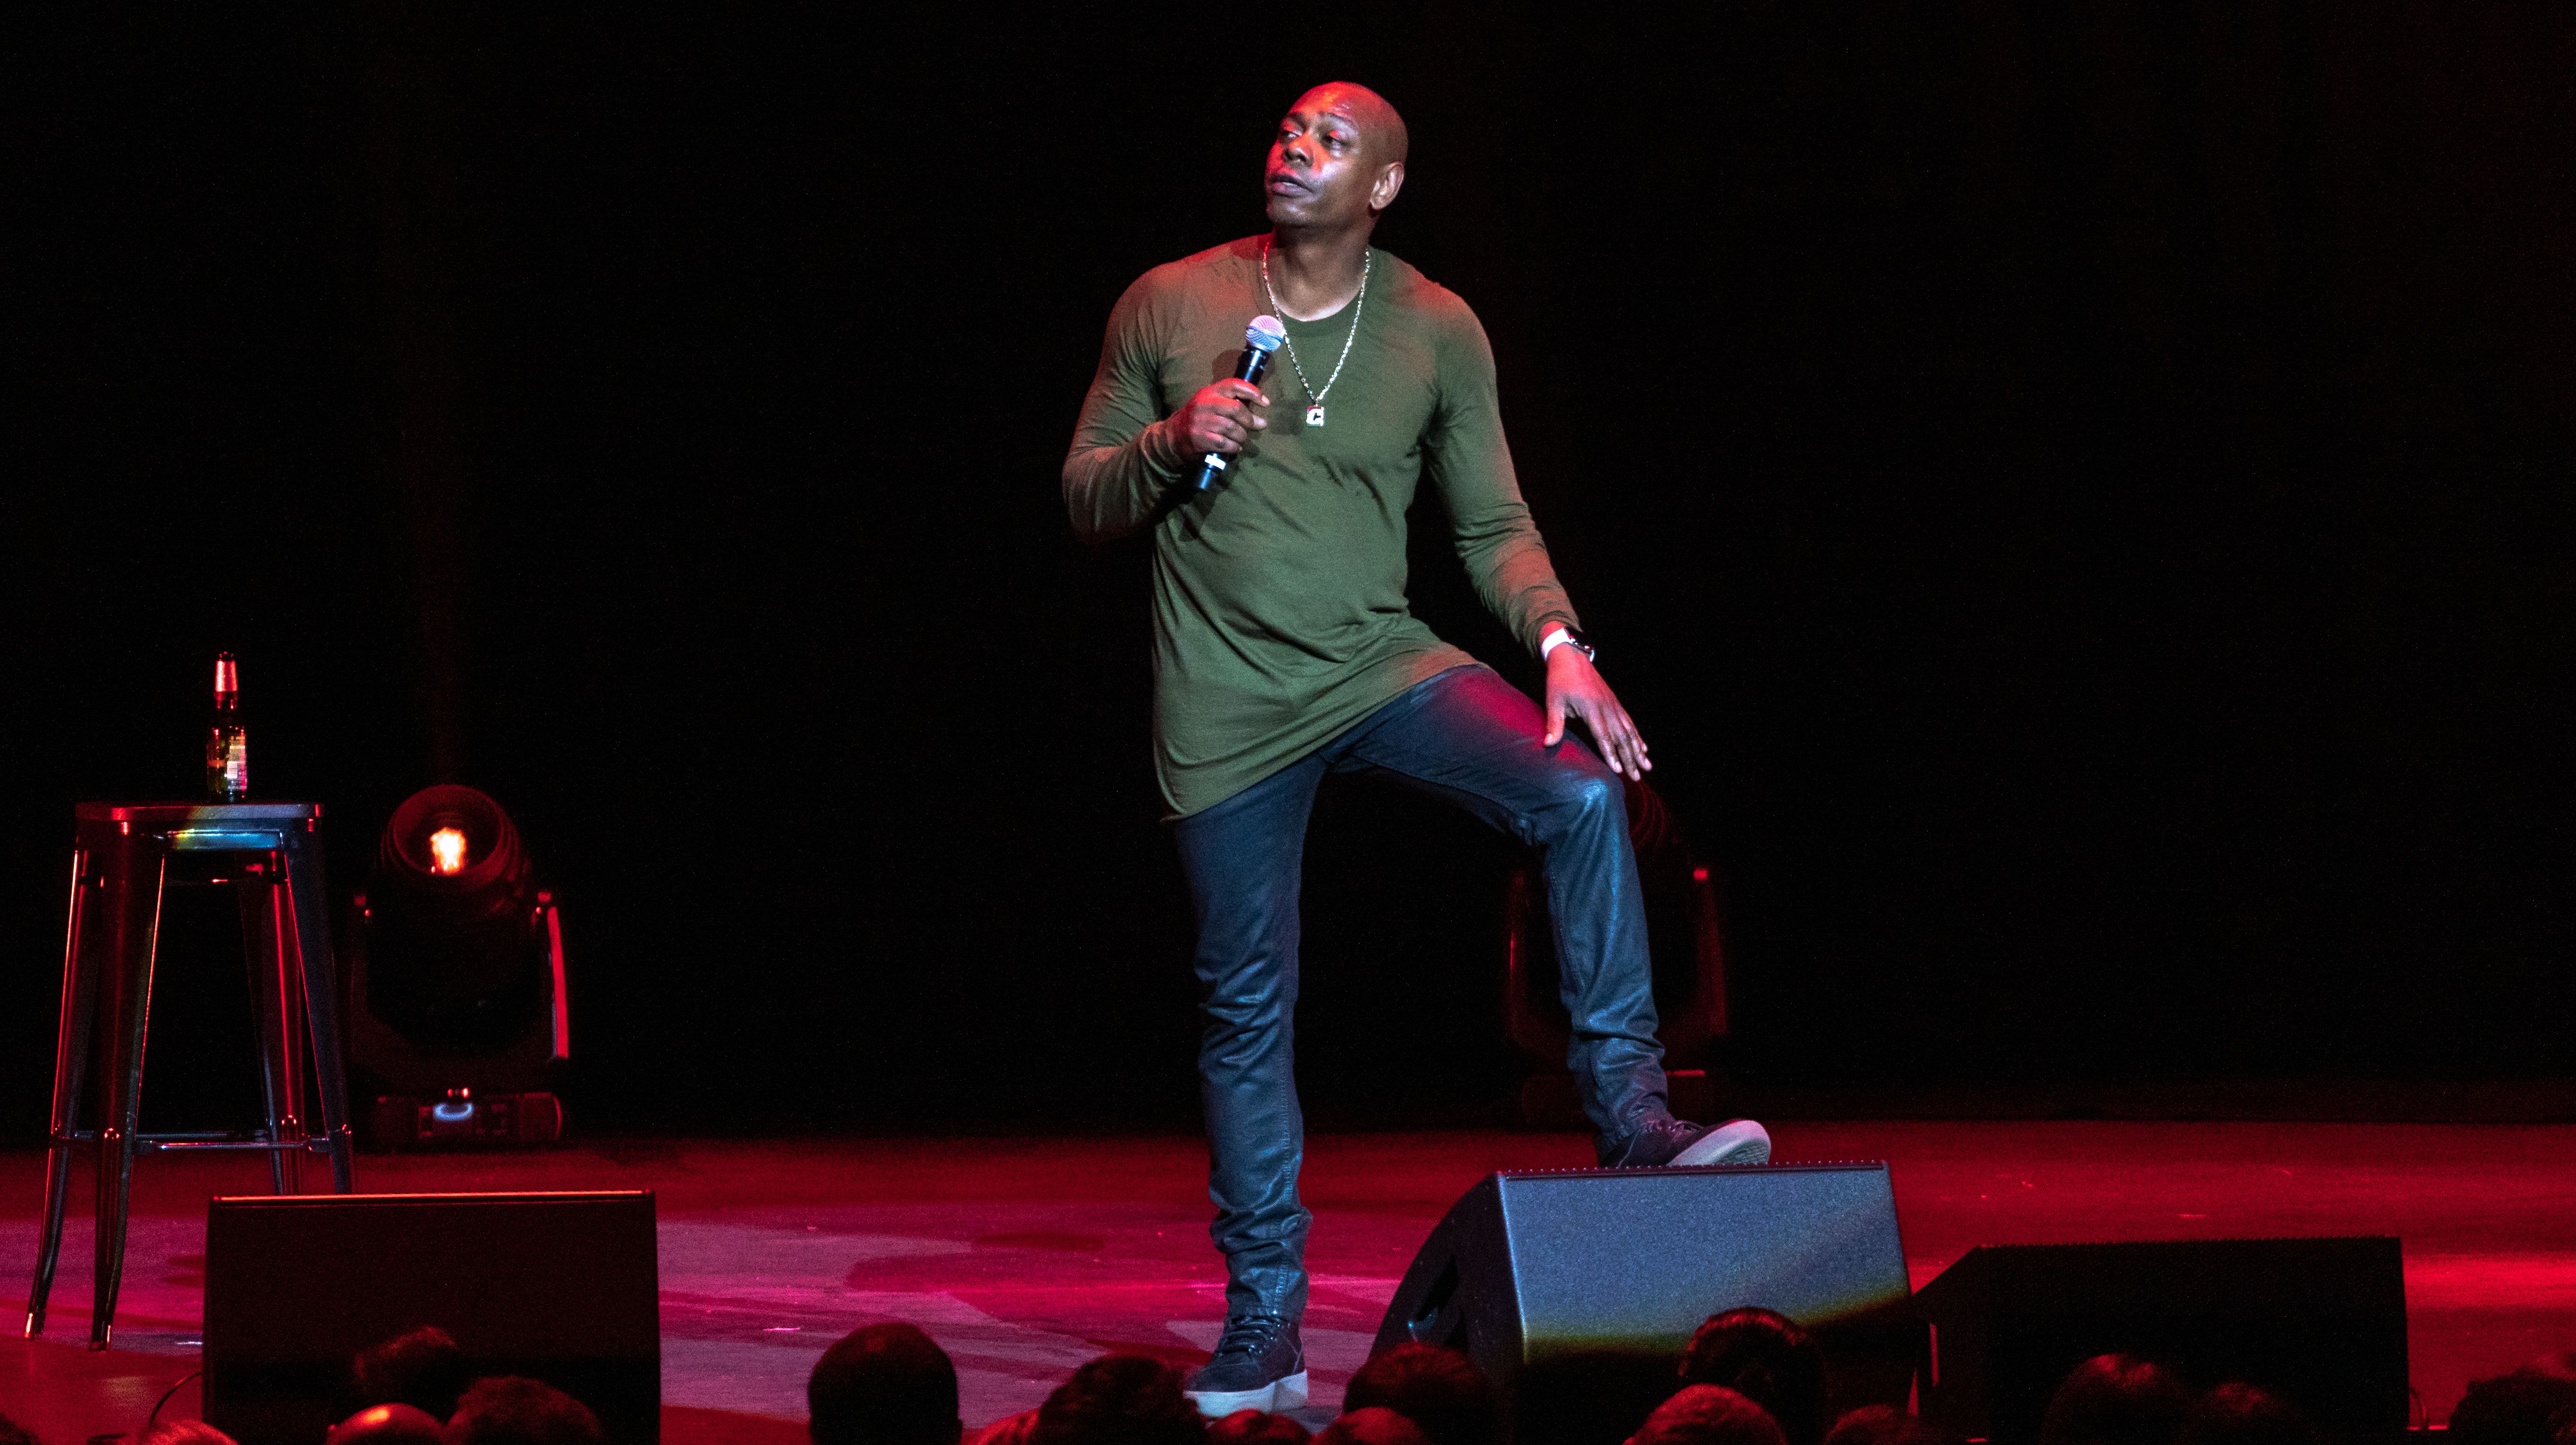 Dave Chappelle photographed performing live